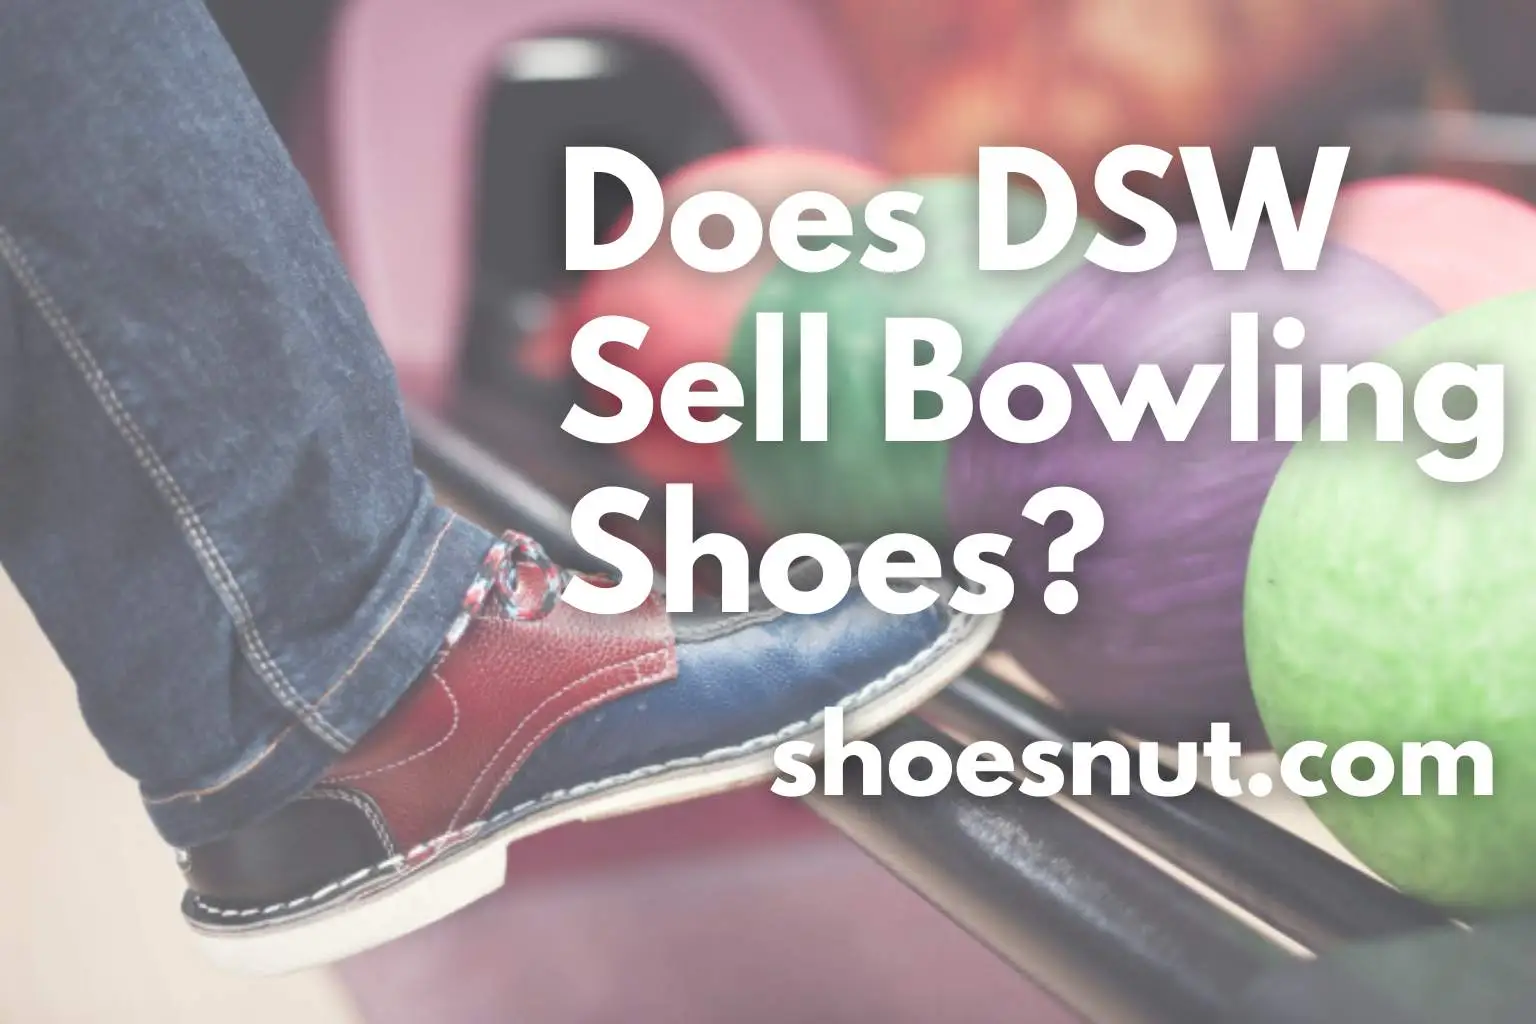 Does DSW Sell Bowling Shoes?